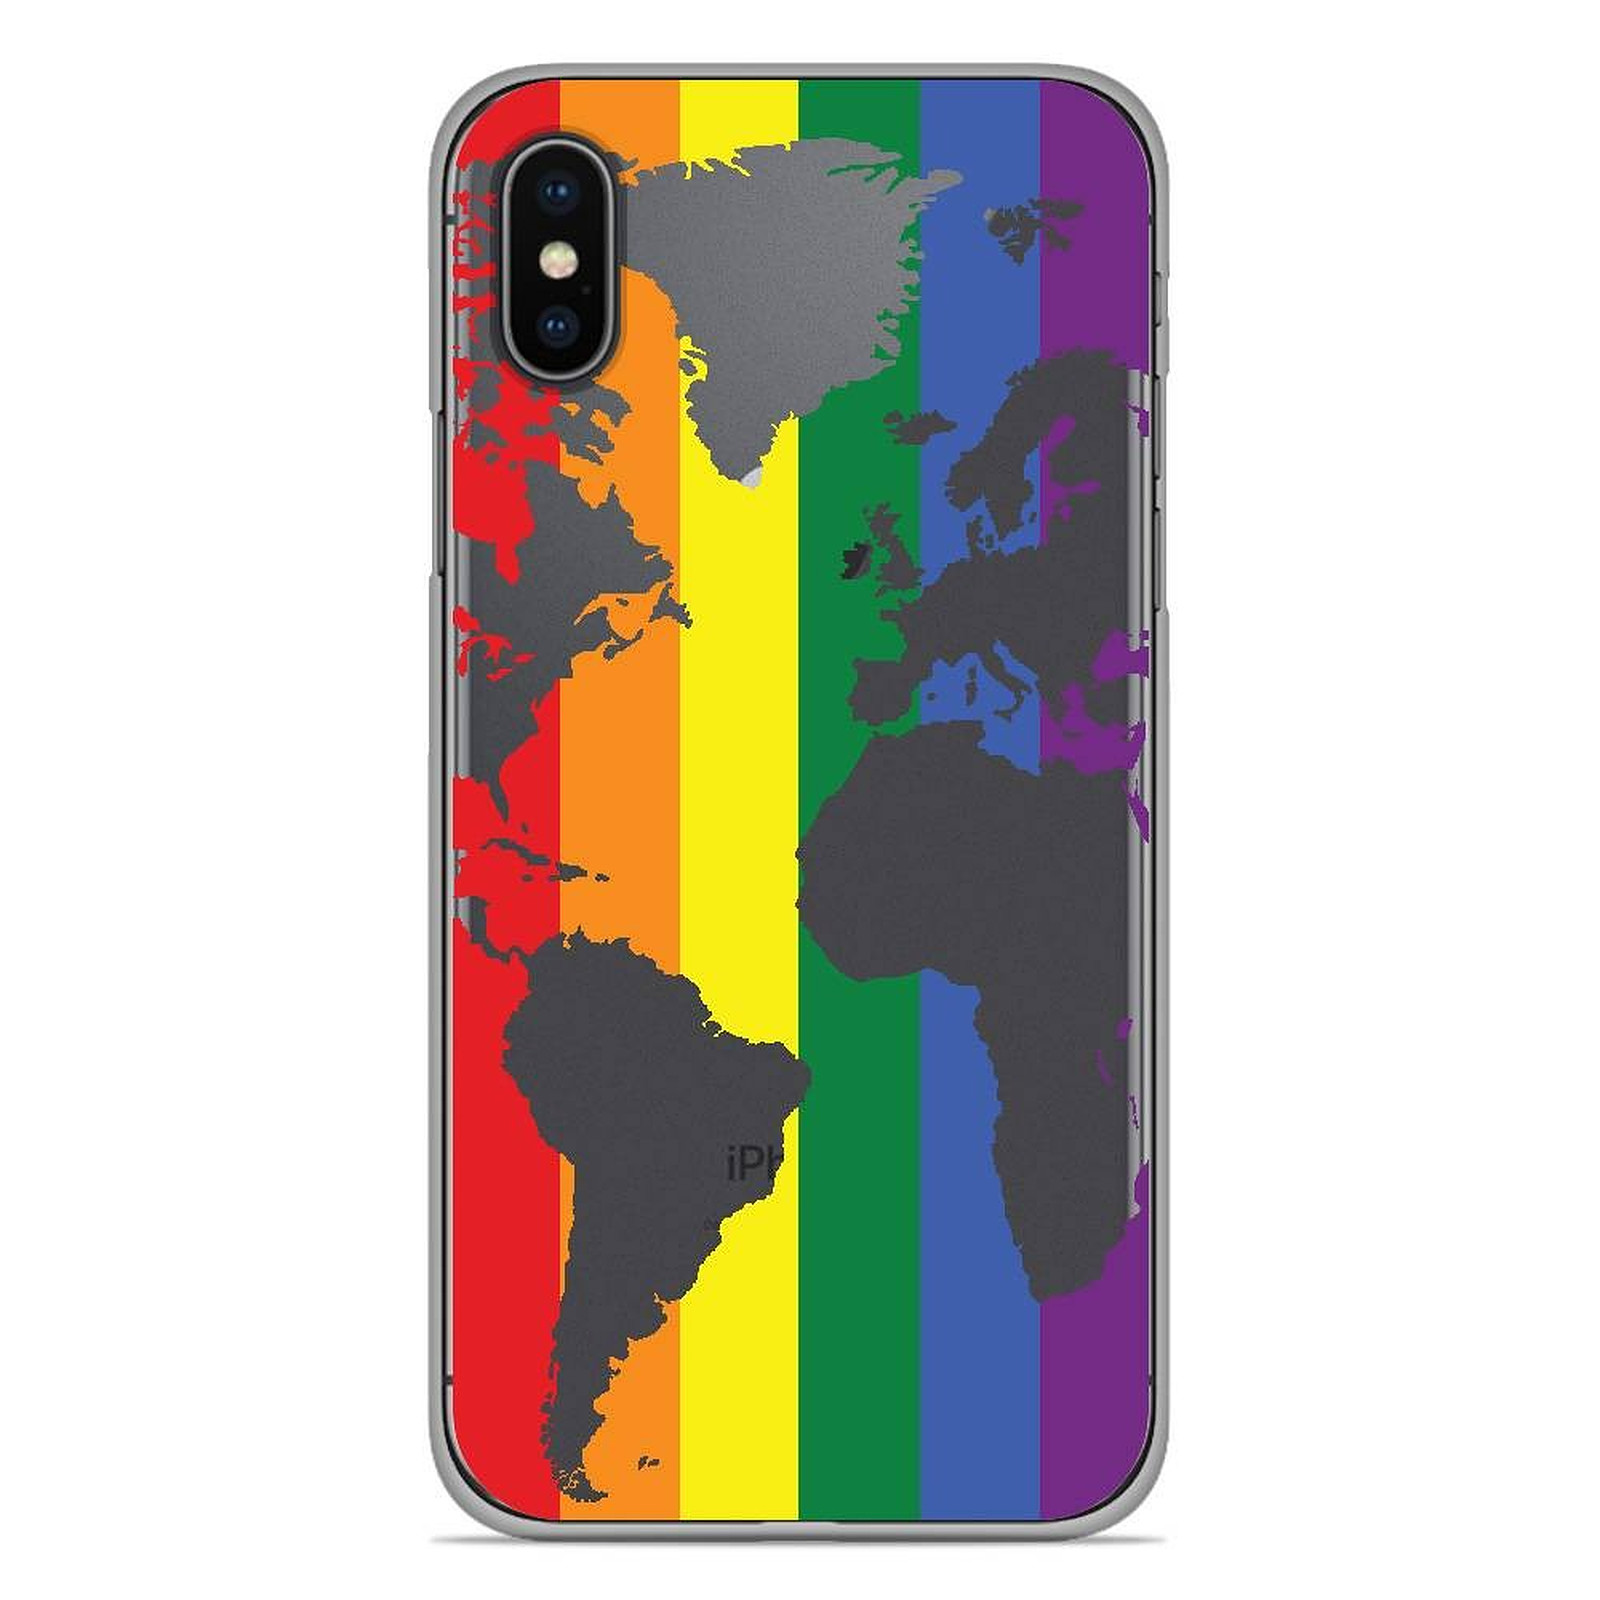 1001 Coques Coque silicone gel Apple iPhone X / XS motif Map LGBT - Coque telephone 1001Coques